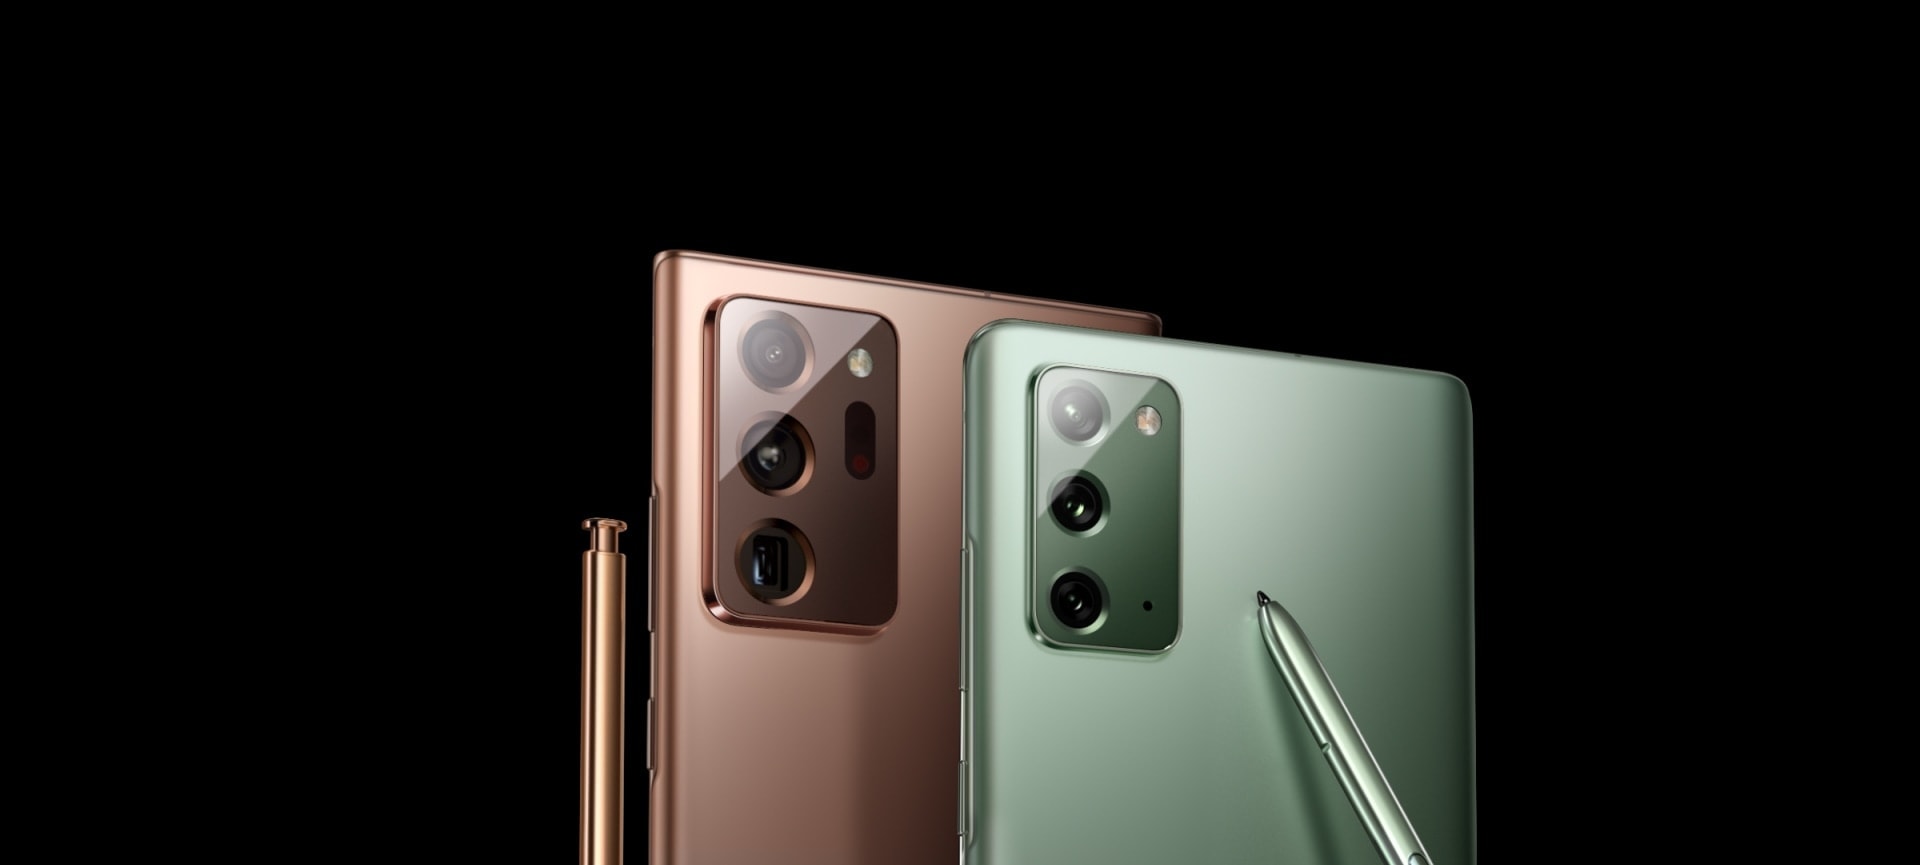 The upper halves of Galaxy Note20 in Mystic Green and Galaxy Note20 Ultra in Mystic Bronze, both seen from the rear at a three-quarter angle. The matching S Pen for both phones is leaning against the phone.